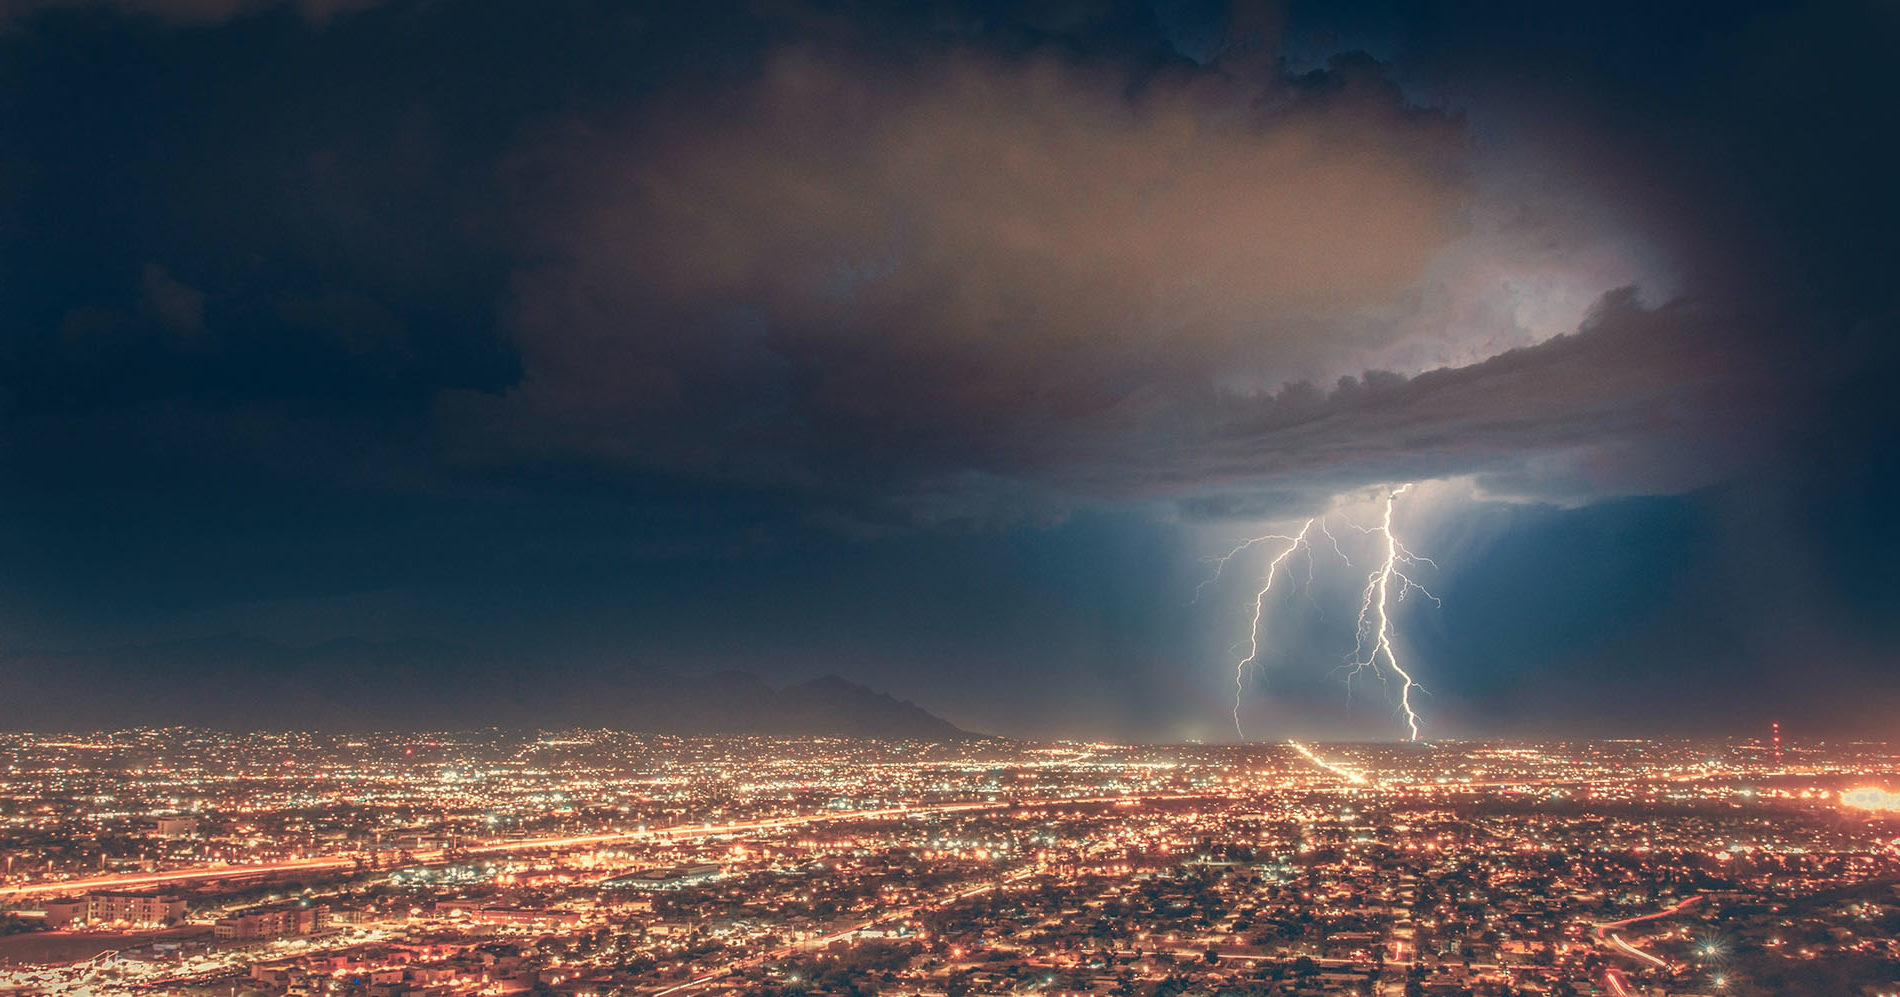 Lightning striking the ground at the edge of a large city.